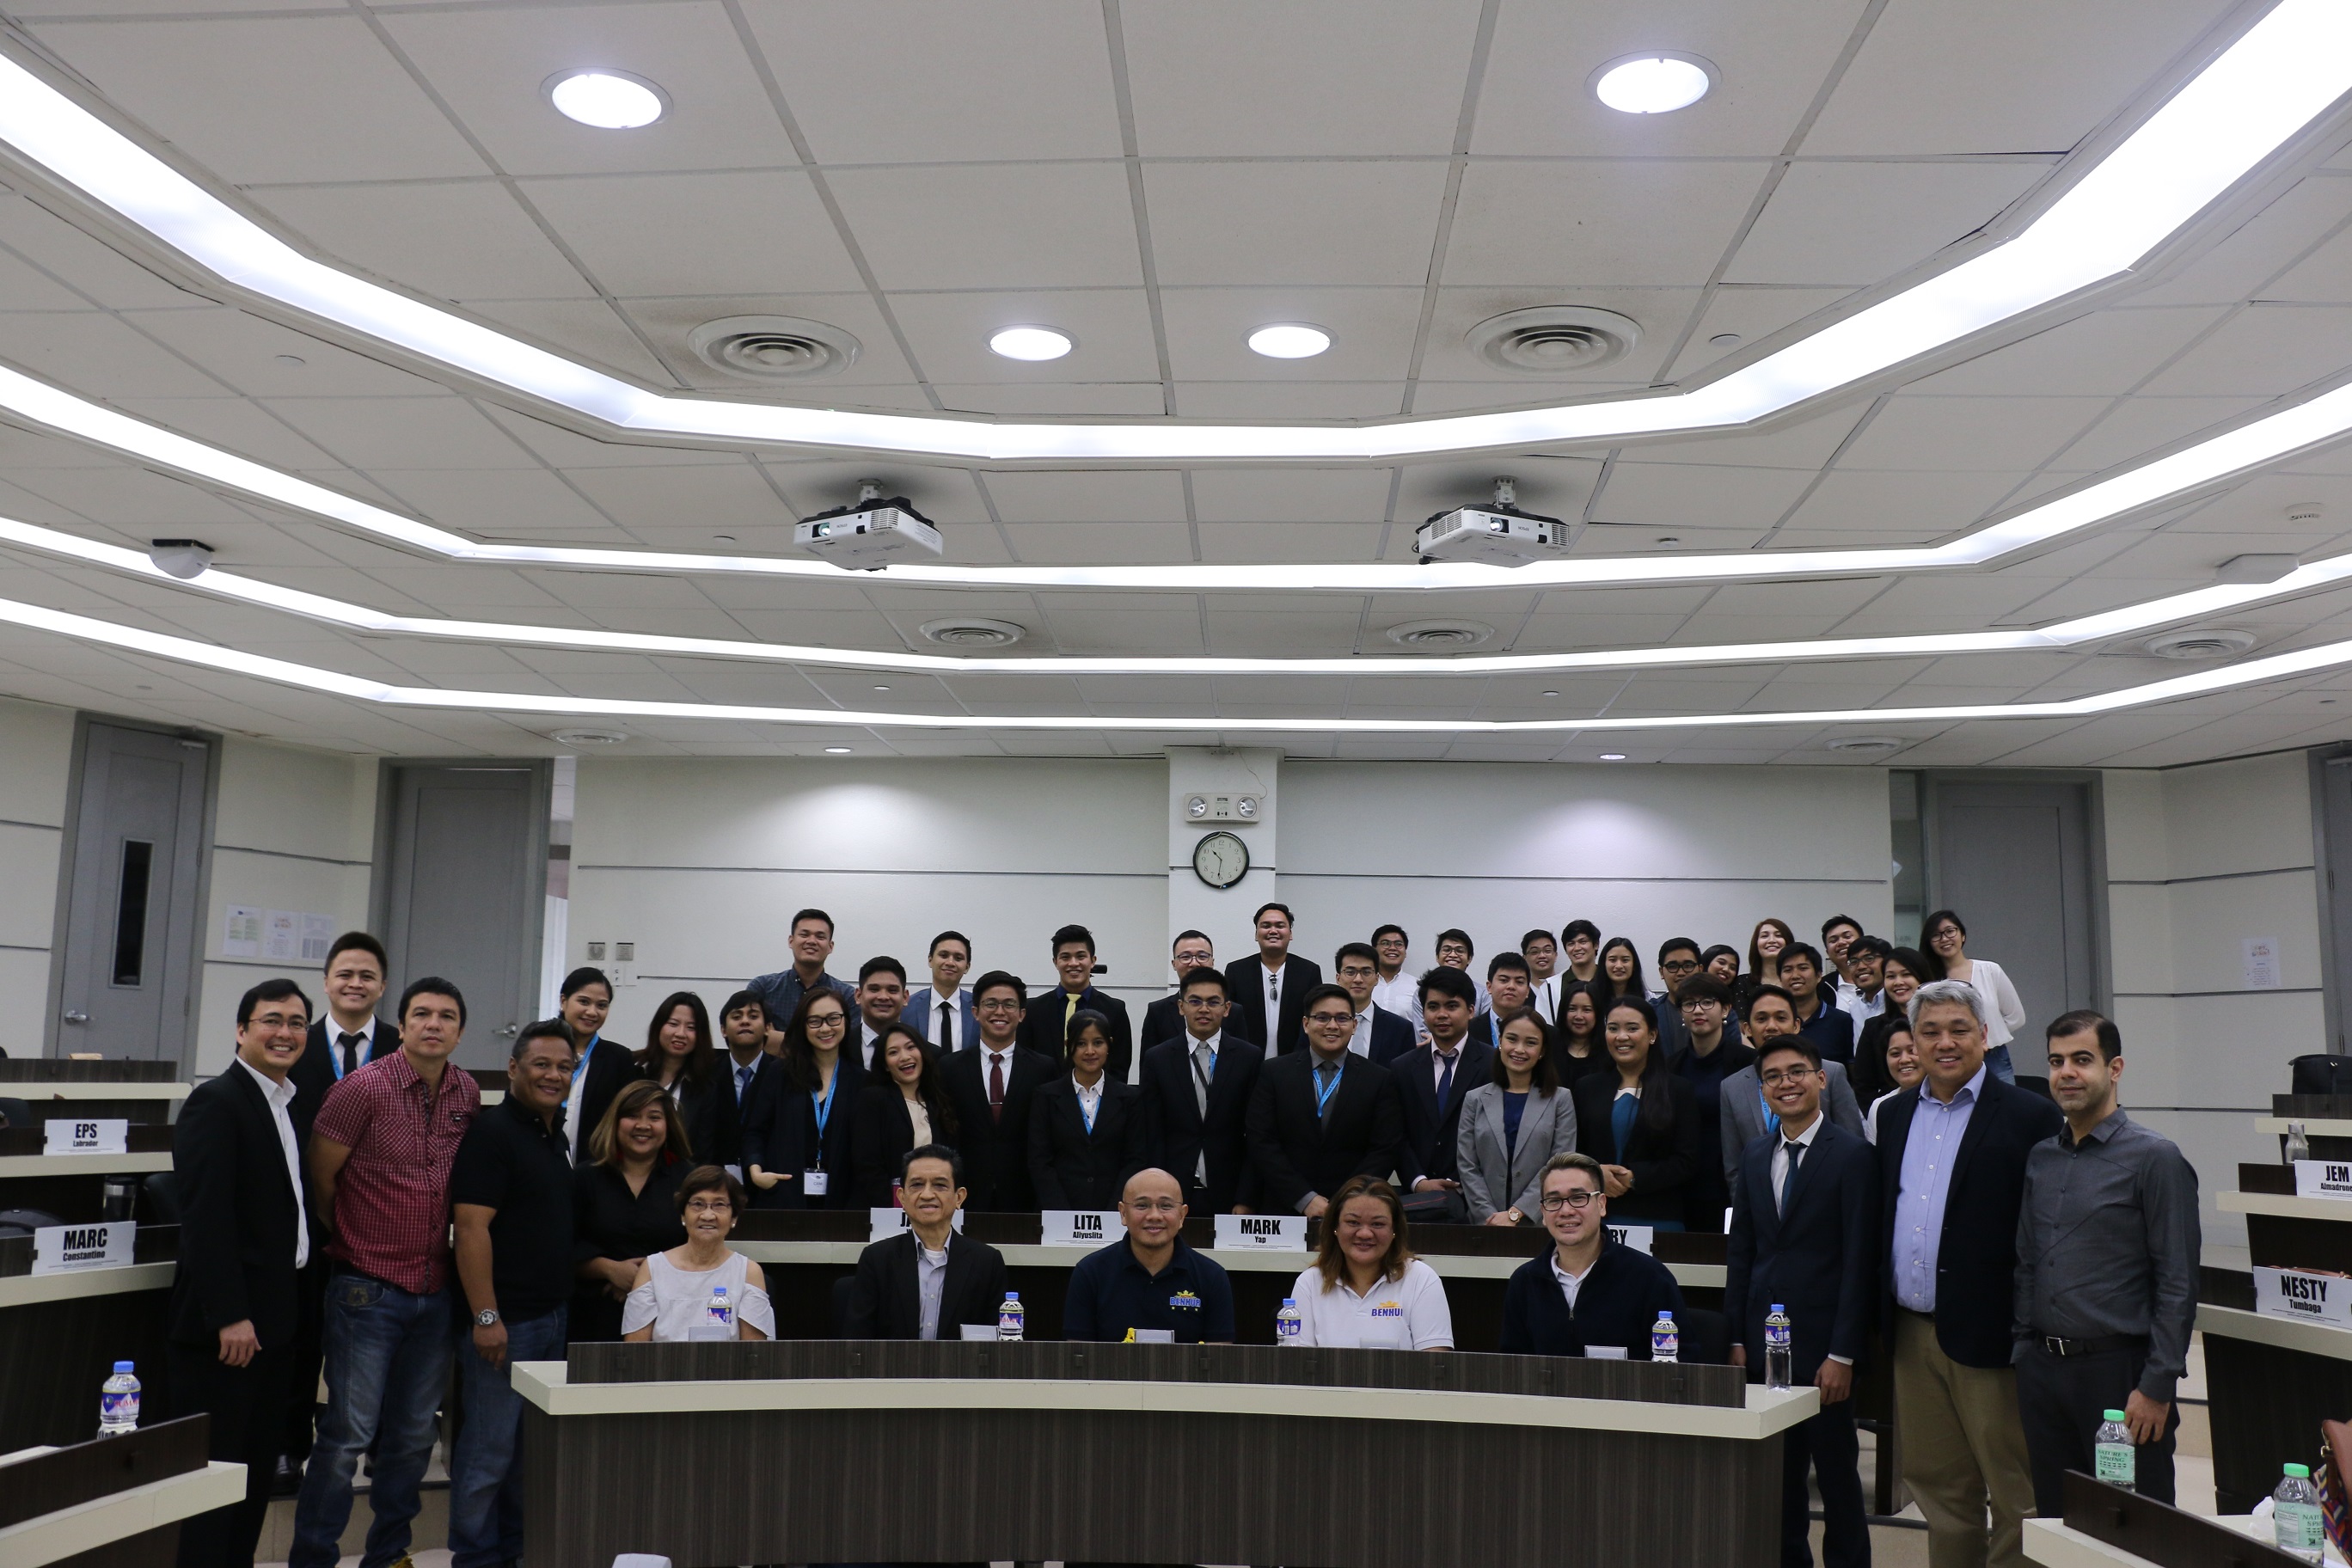 Professor Matthew Escobido (leftmost) with the students and professors of the Master of Science in Innovation and Business program and officials of Barangay Poblacion.